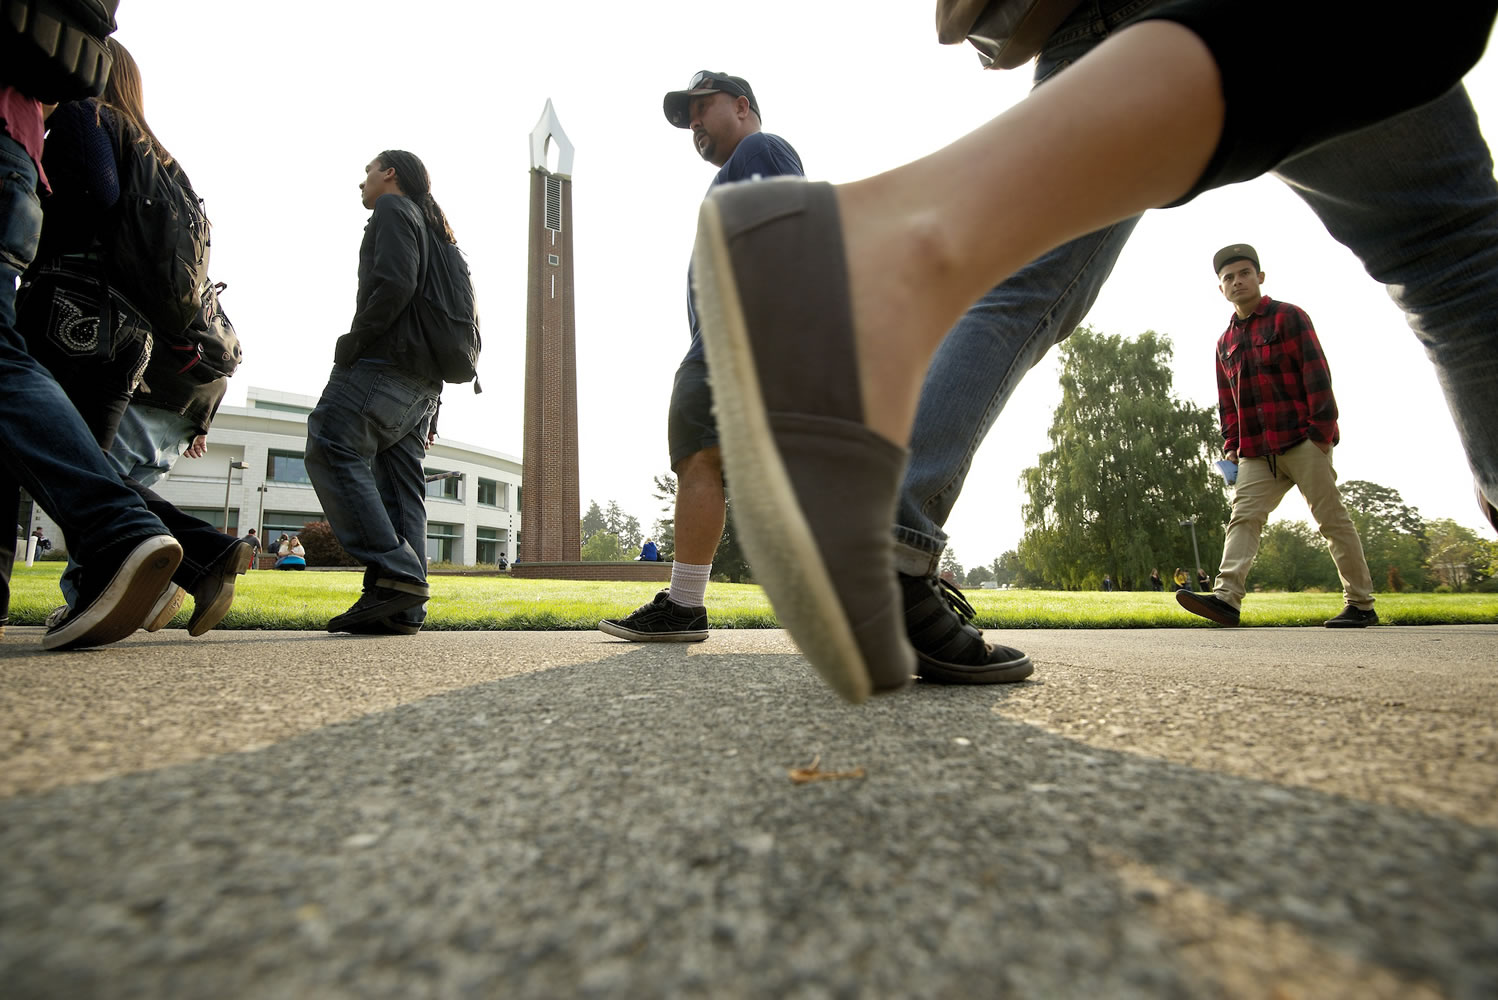 With the chime tower in the background, students head for their classrooms Monday on the first day of the 2012-2013 academic year at Clark College.